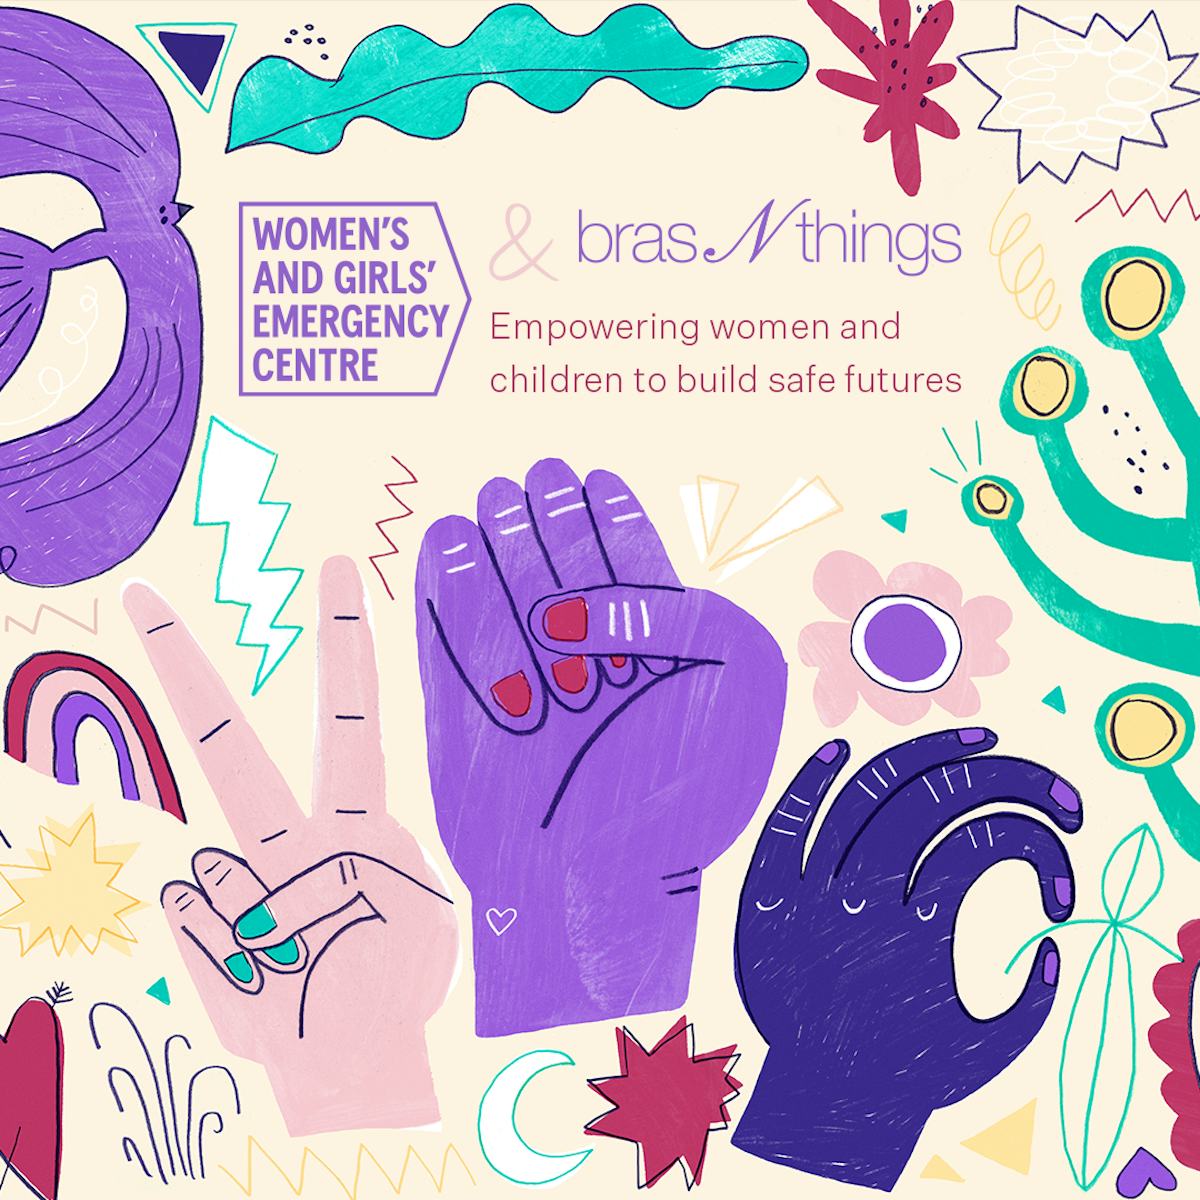 Bras N Things X Women's and Girls' Emergency Centre